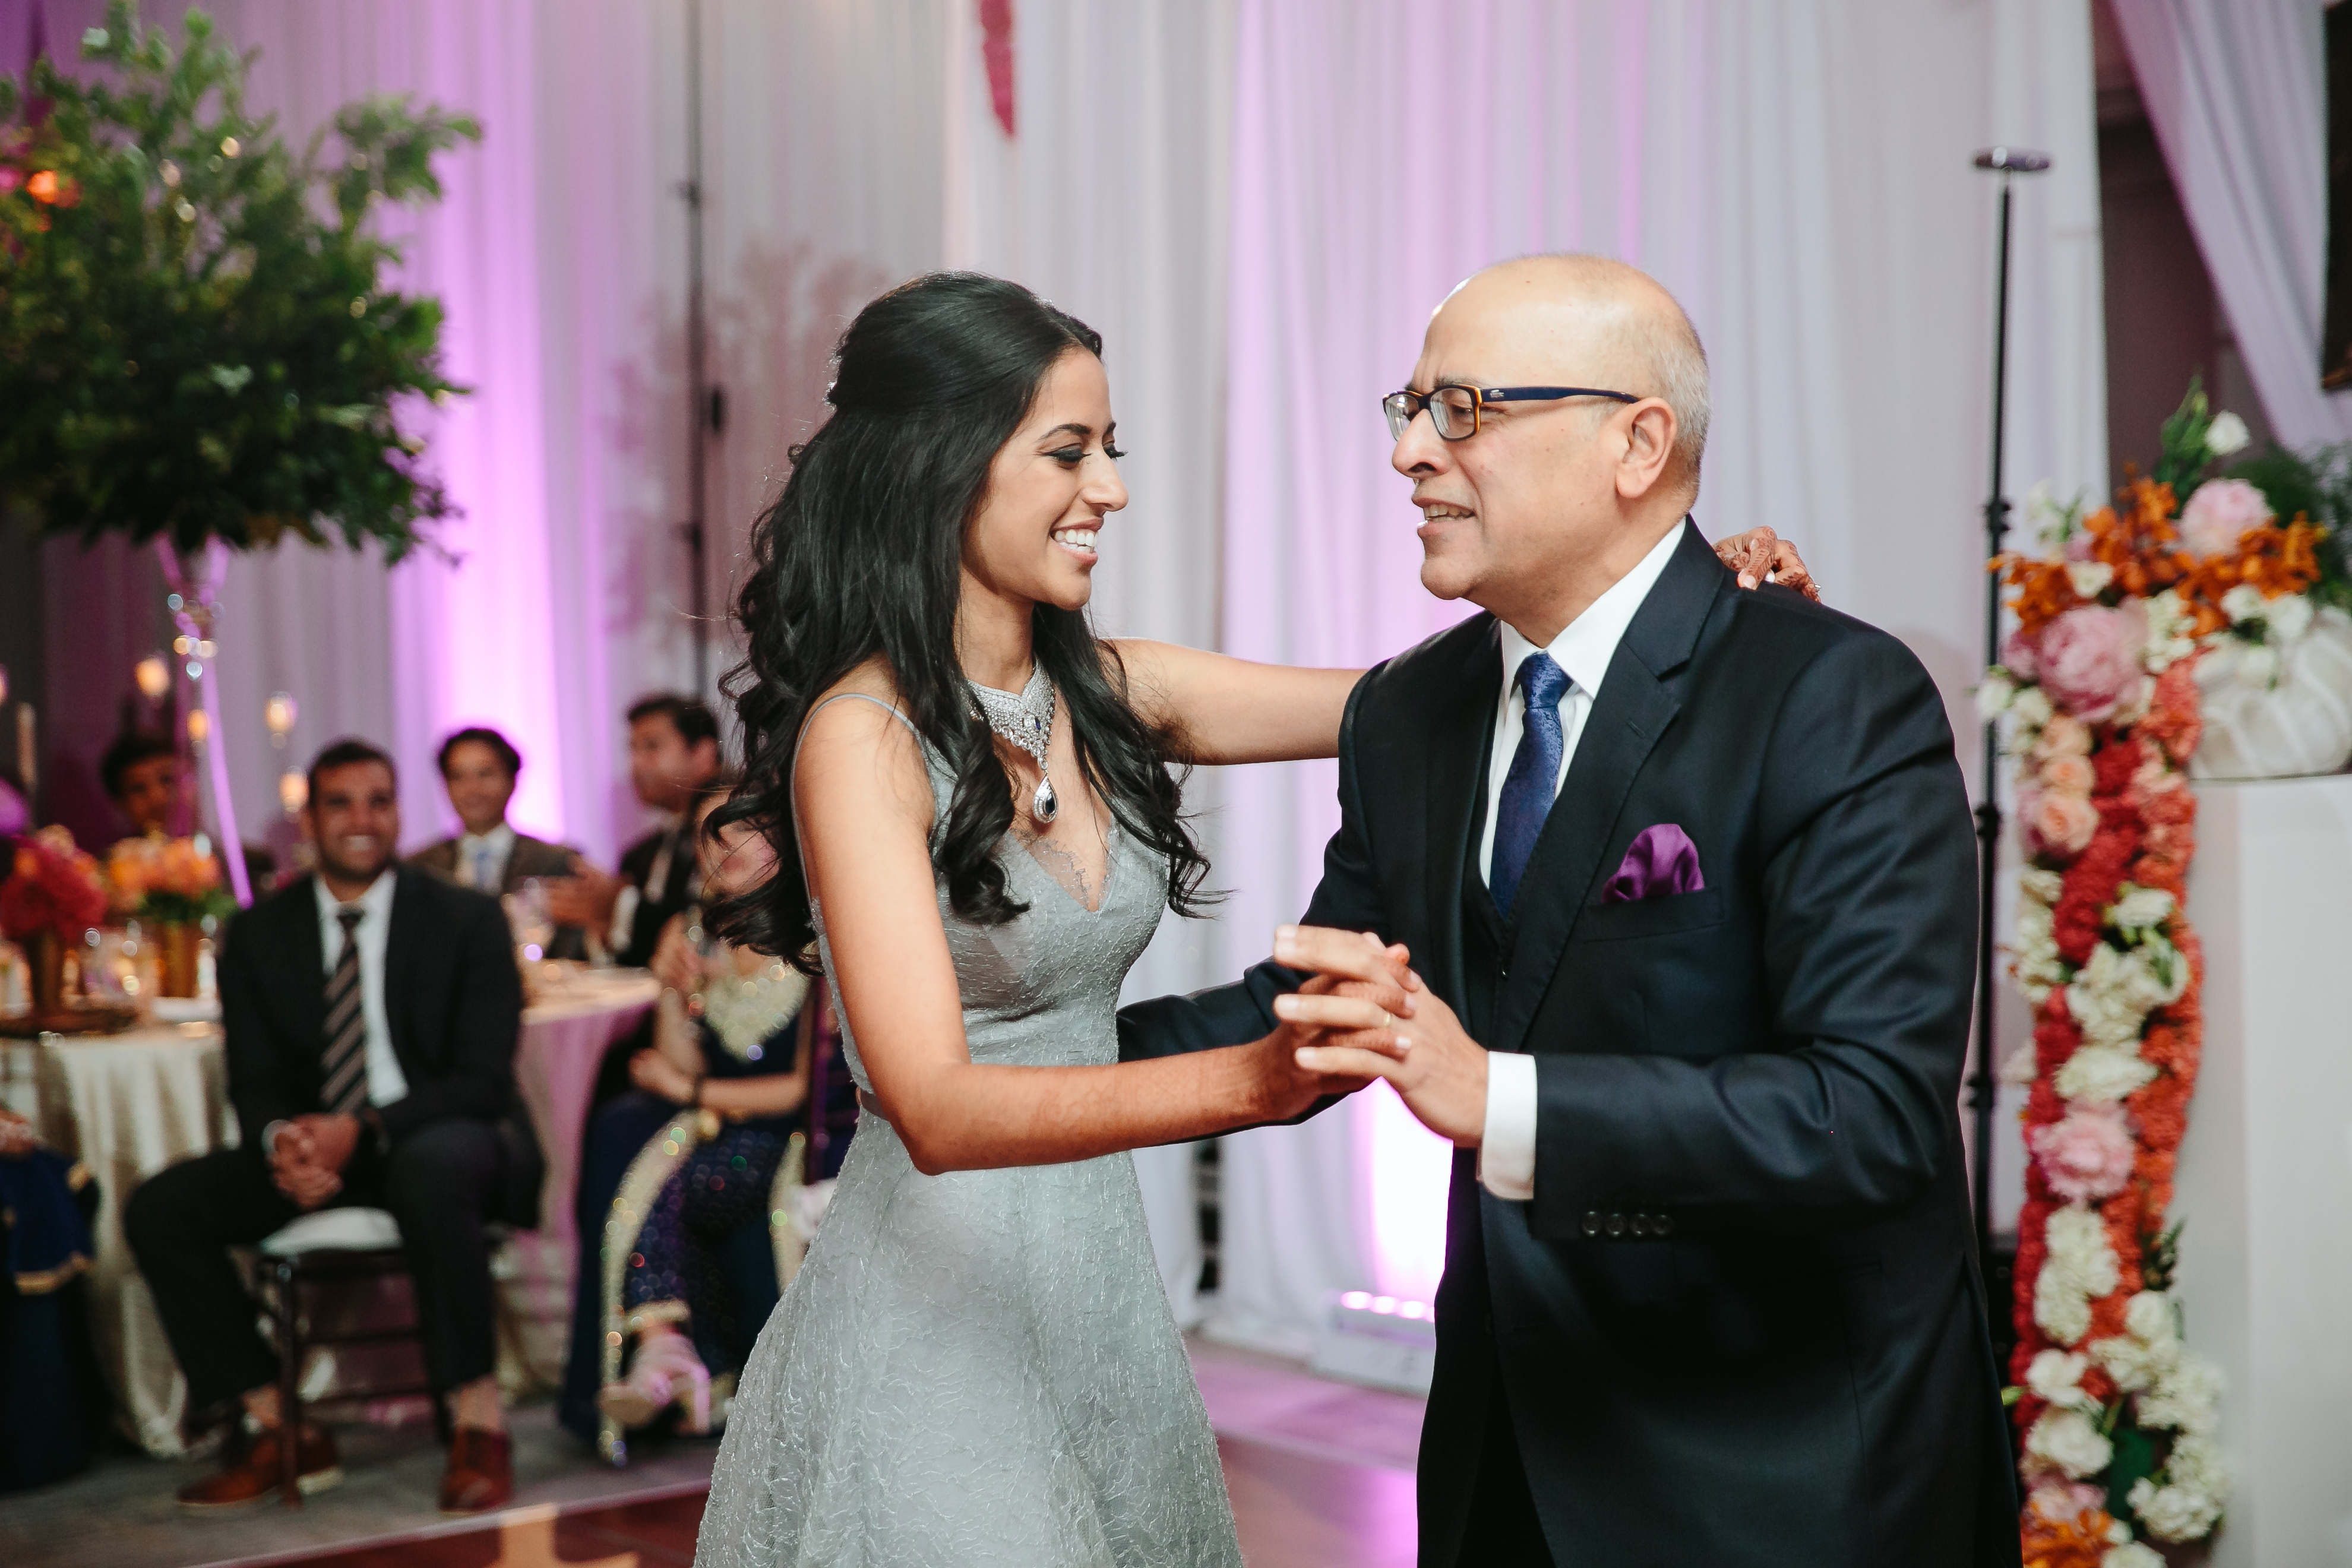 Top 13 Indian Wedding Reception Father Daughter Dance Songs